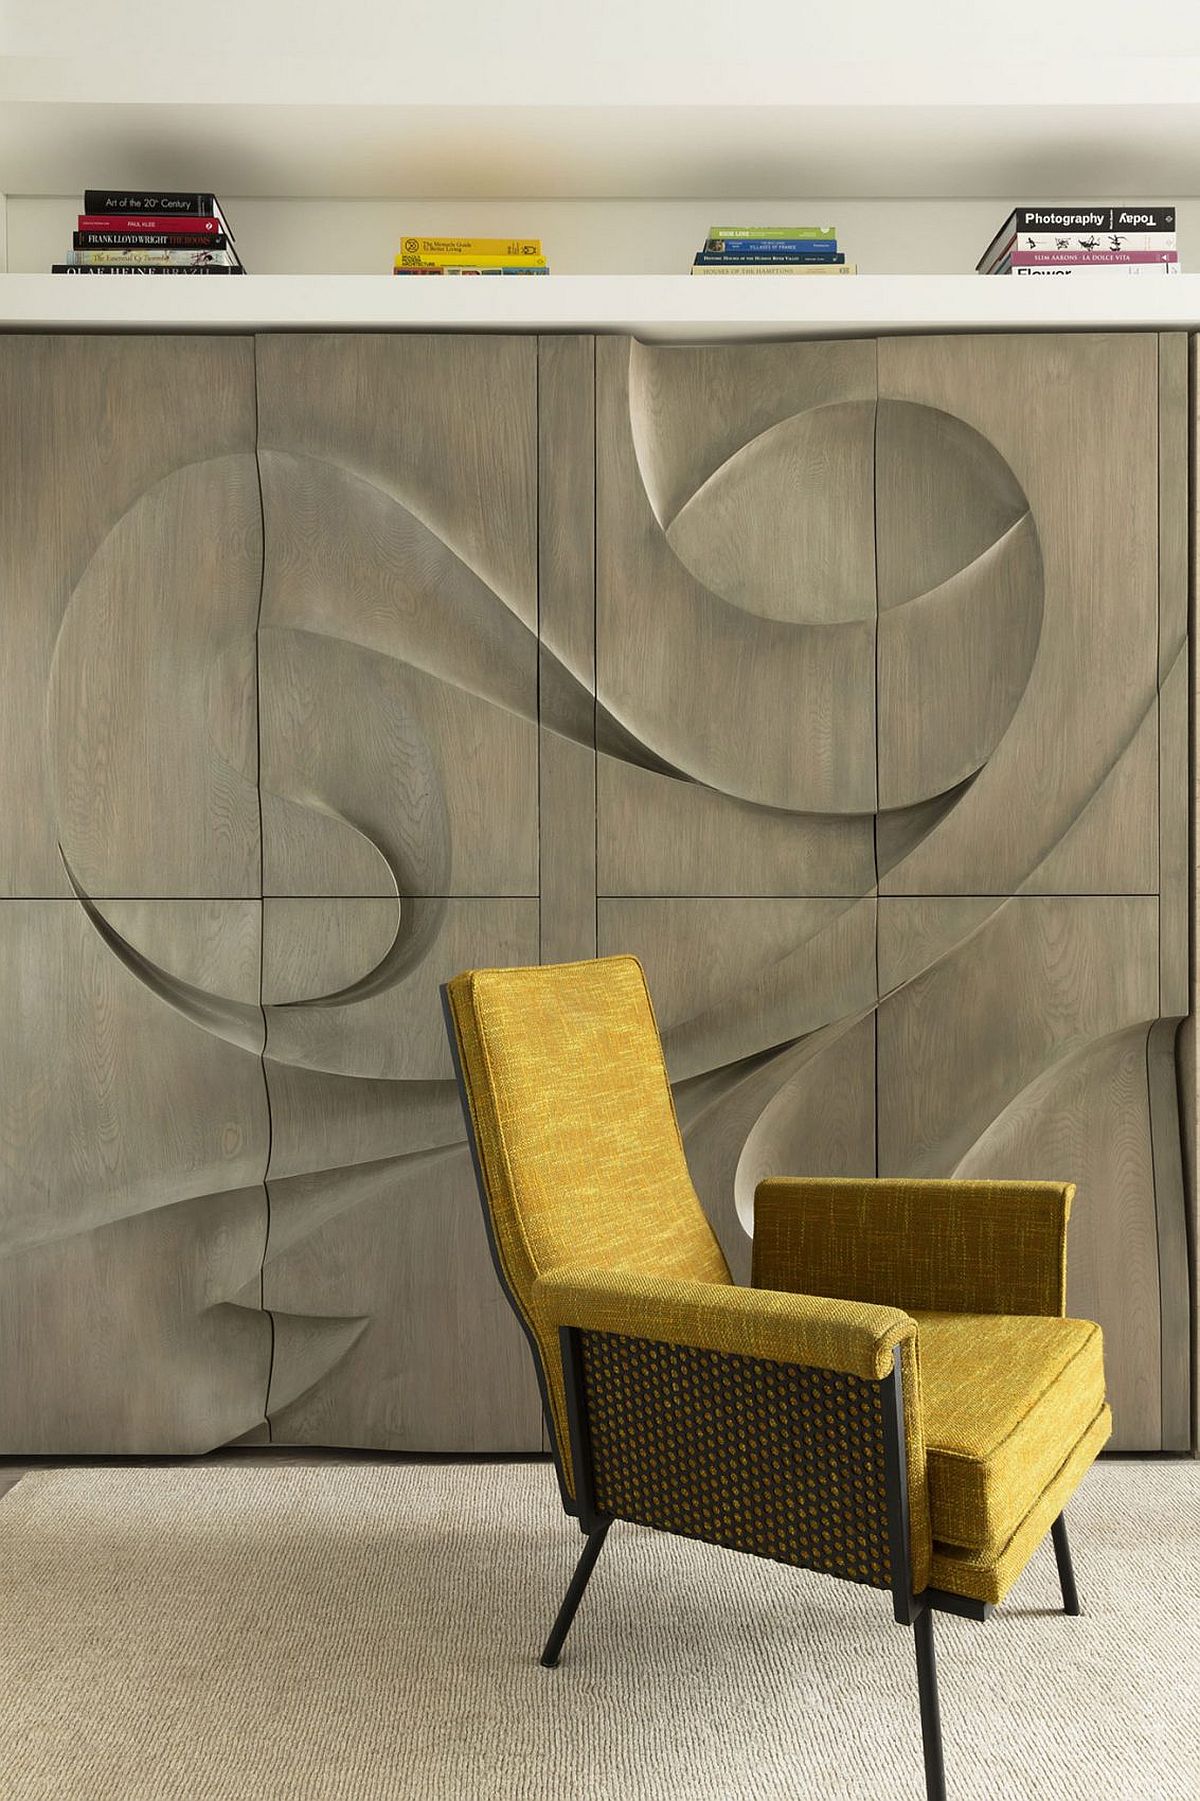 Bespoke millwork gives the interior sculptural style